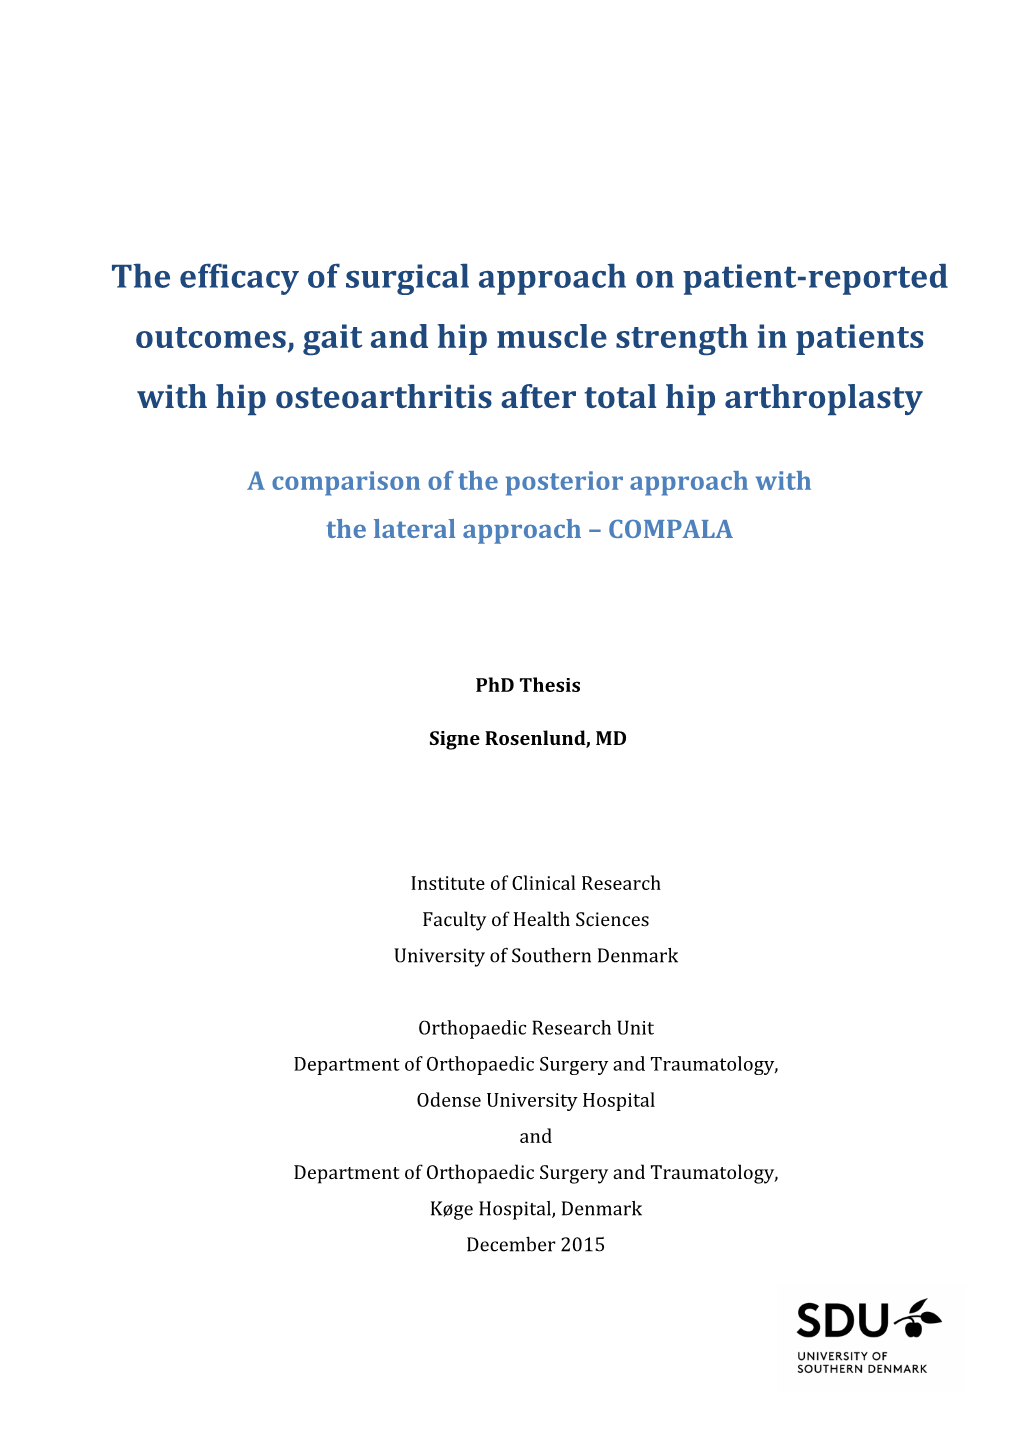 The Efficacy of Surgical Approach on Patient-Reported Outcomes, Gait And